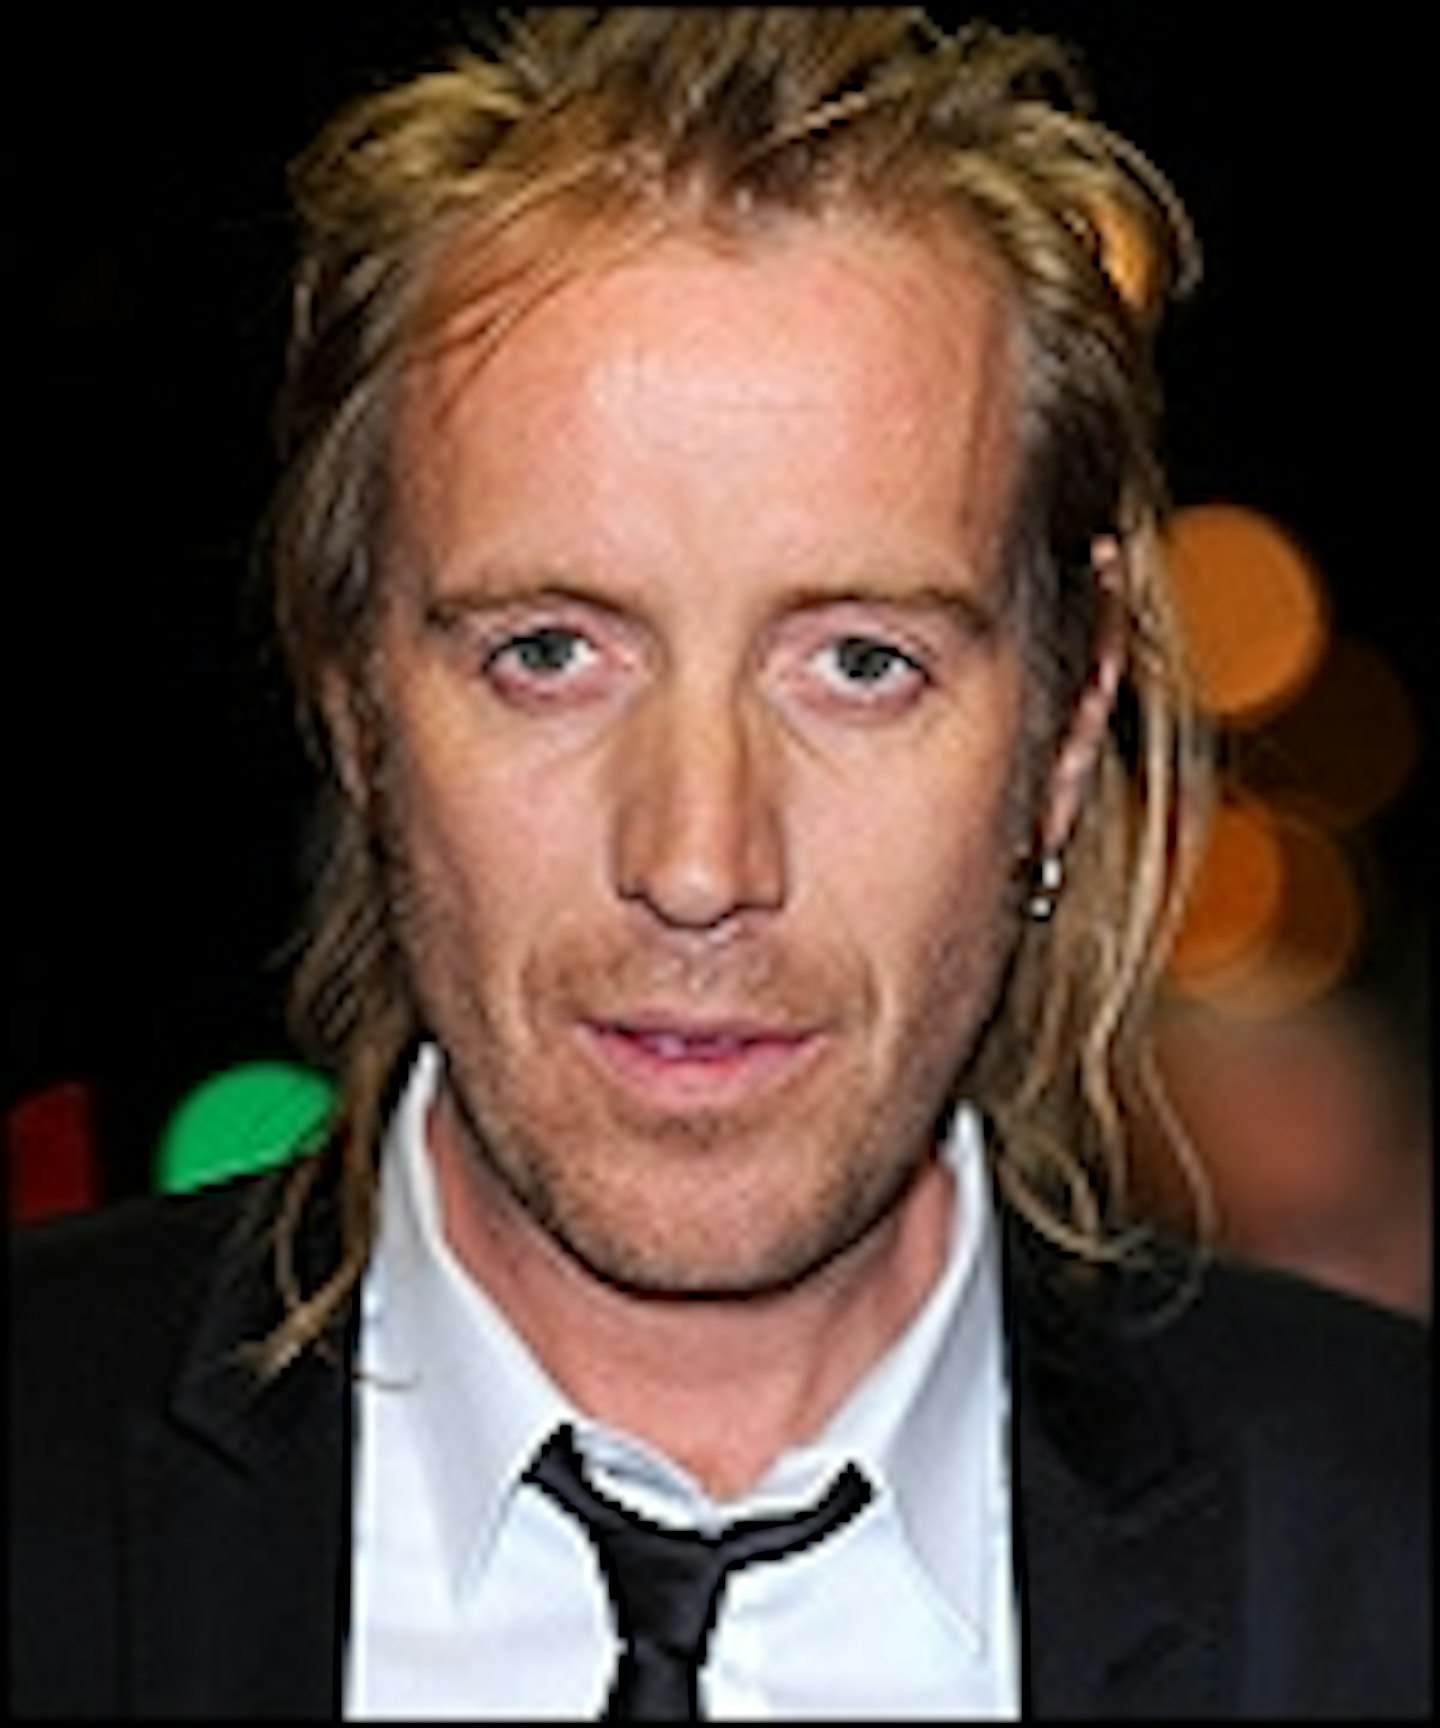 Rhys Ifans Joining Bond 23?